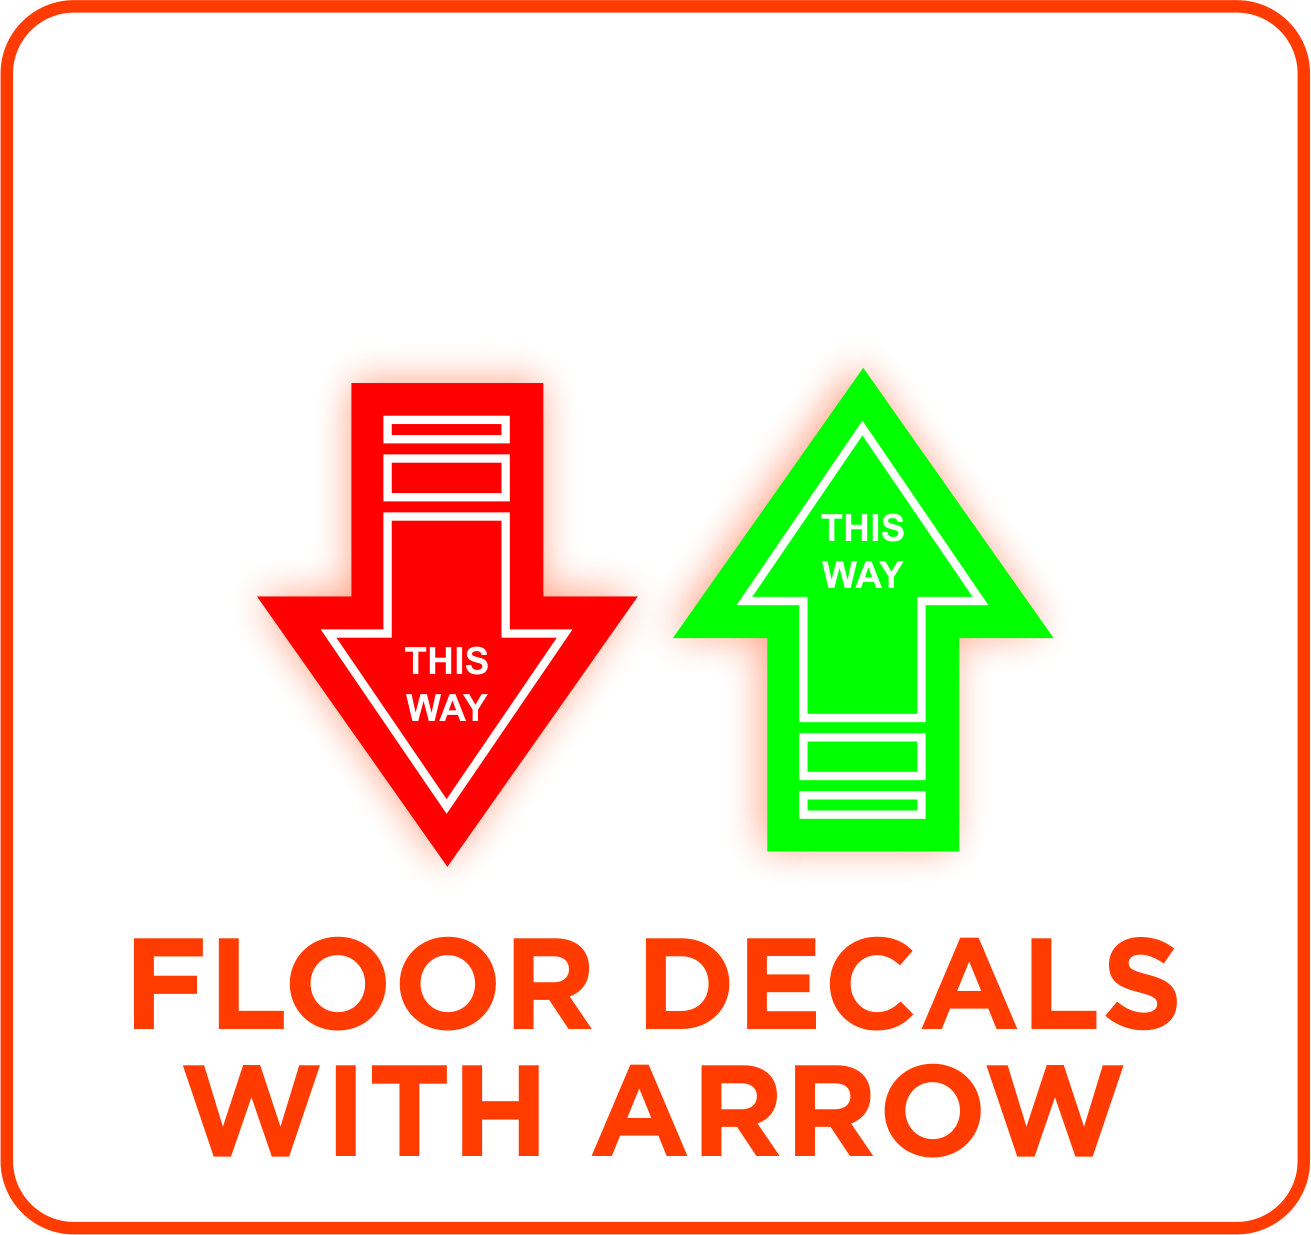 Educational Safety Floor Decals with Arrows